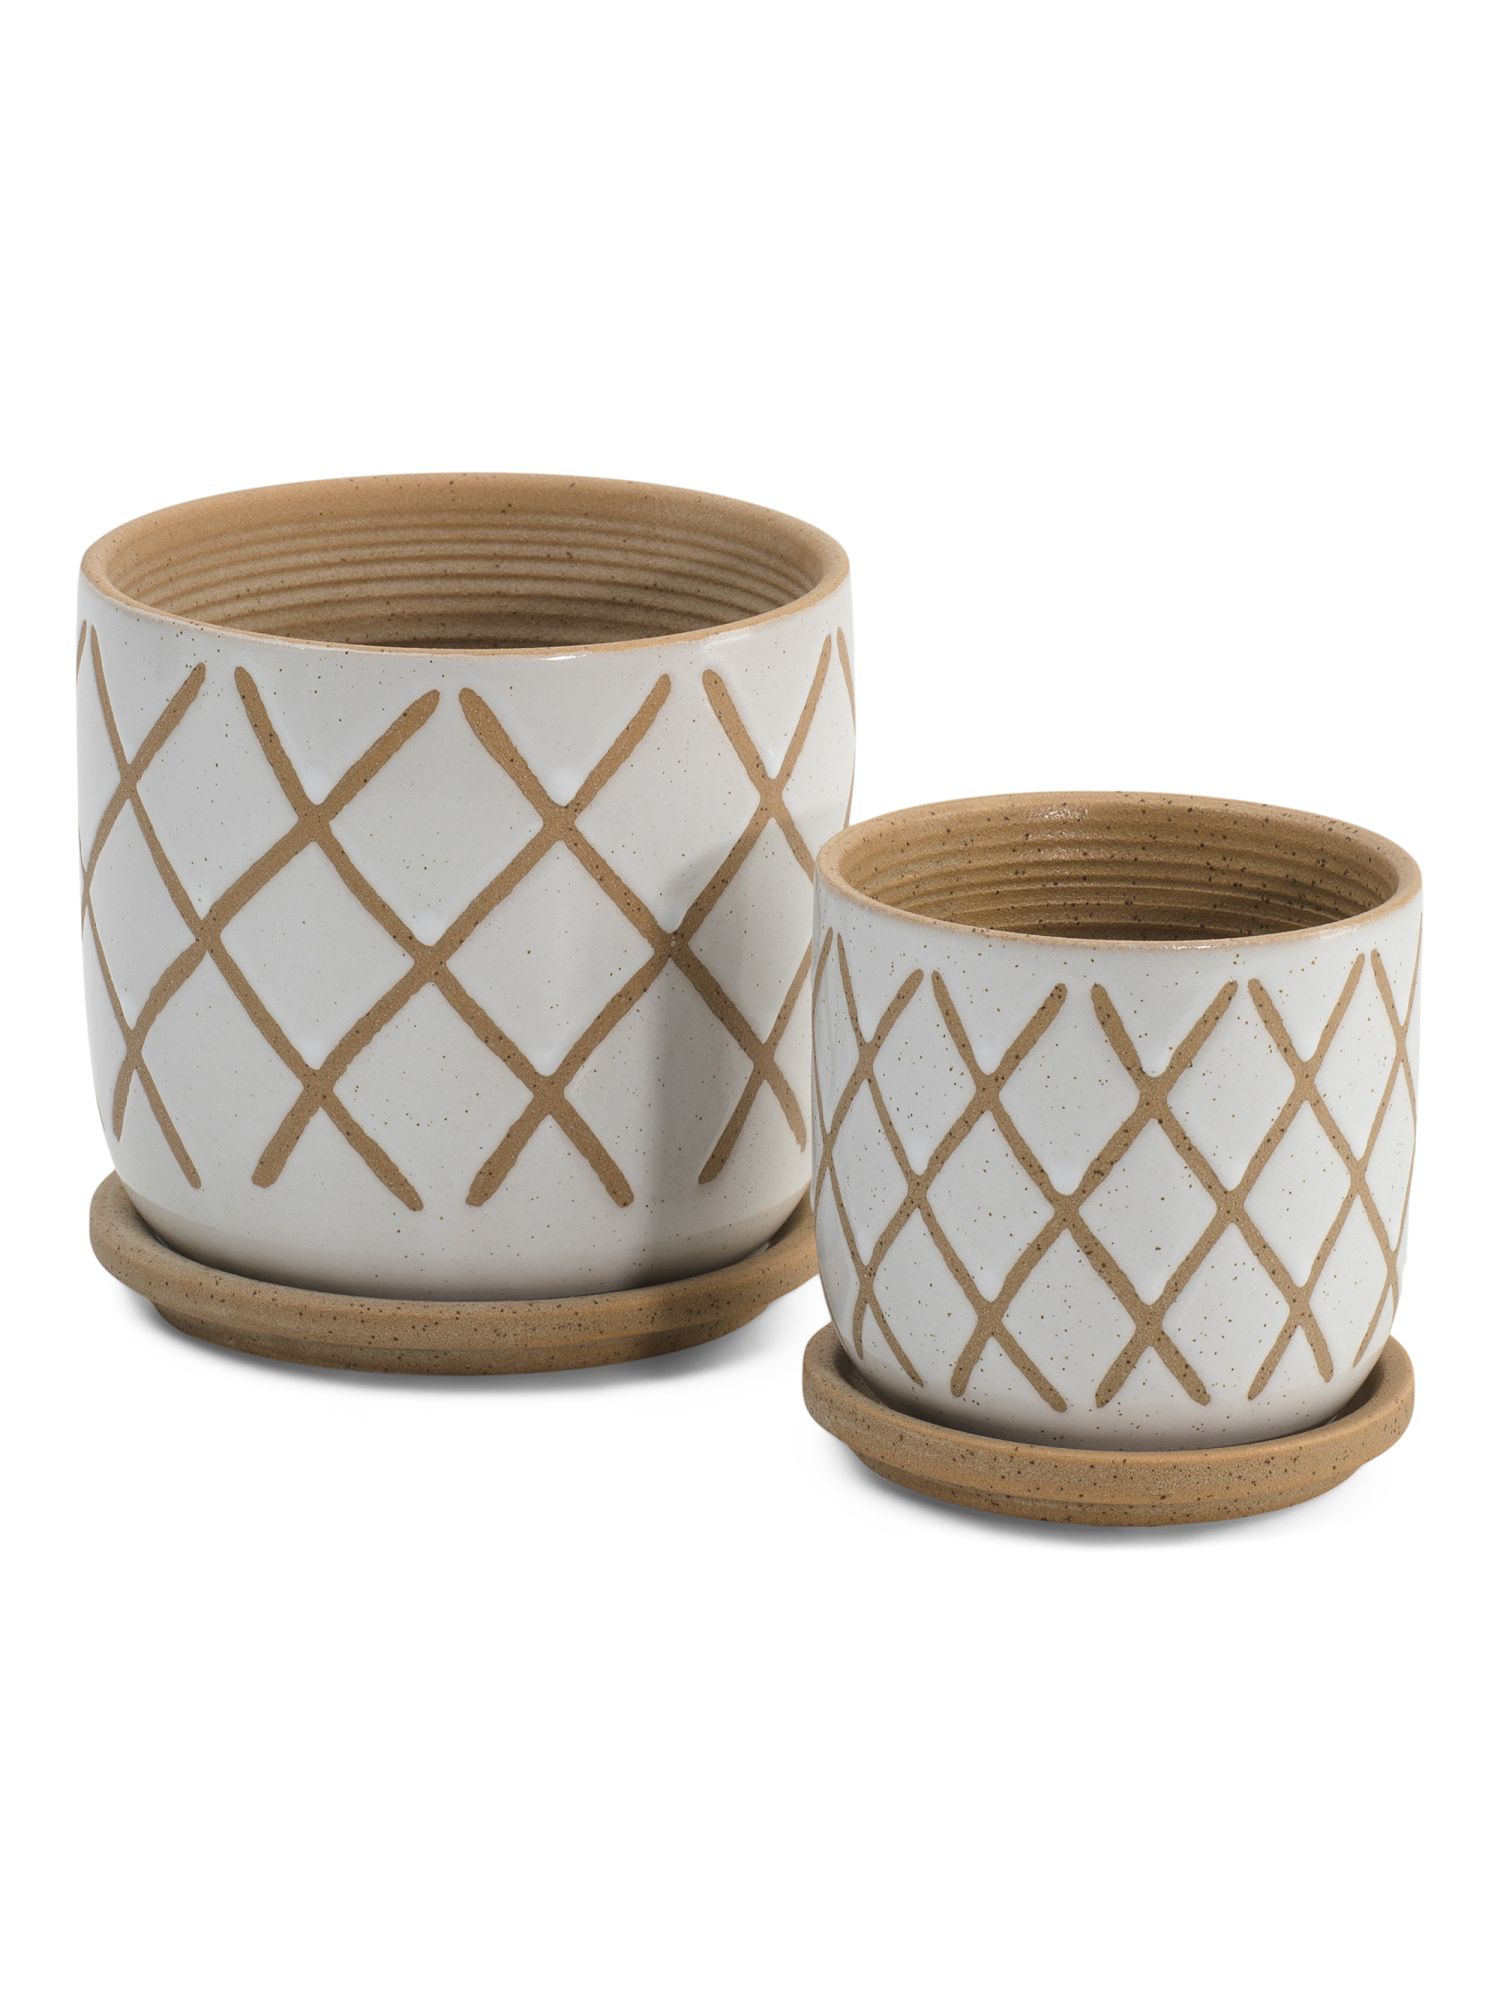 Set Of 2 Cross Planters With Saucer | TJ Maxx